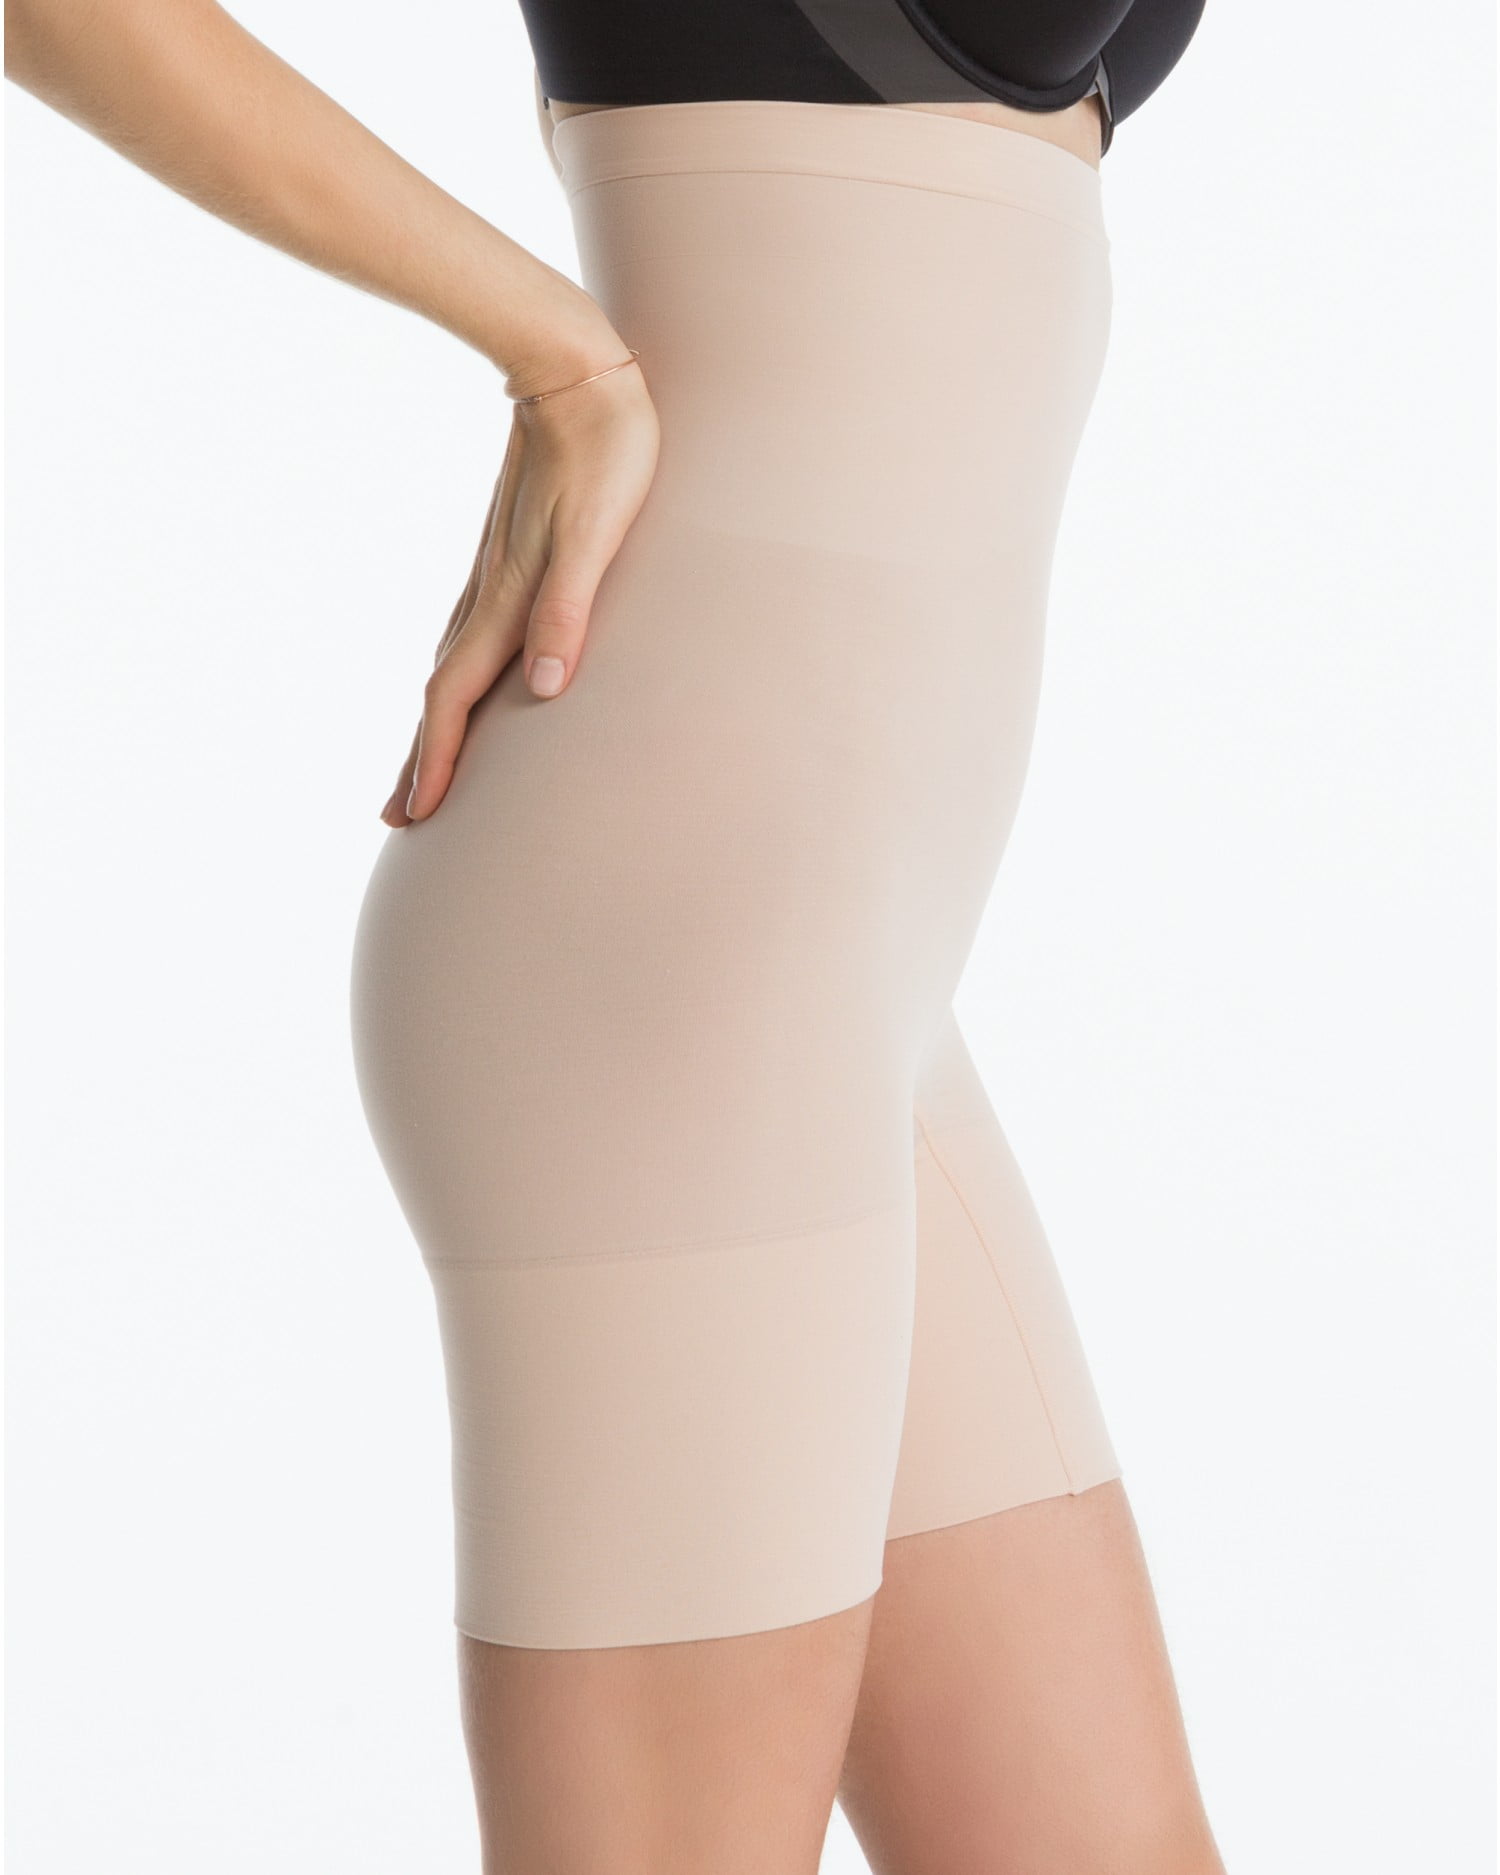 NEW W TAG SPANX Assets Luxe Lean High-Waist Girl Shapewear Shorts FS3715  Nude XL 